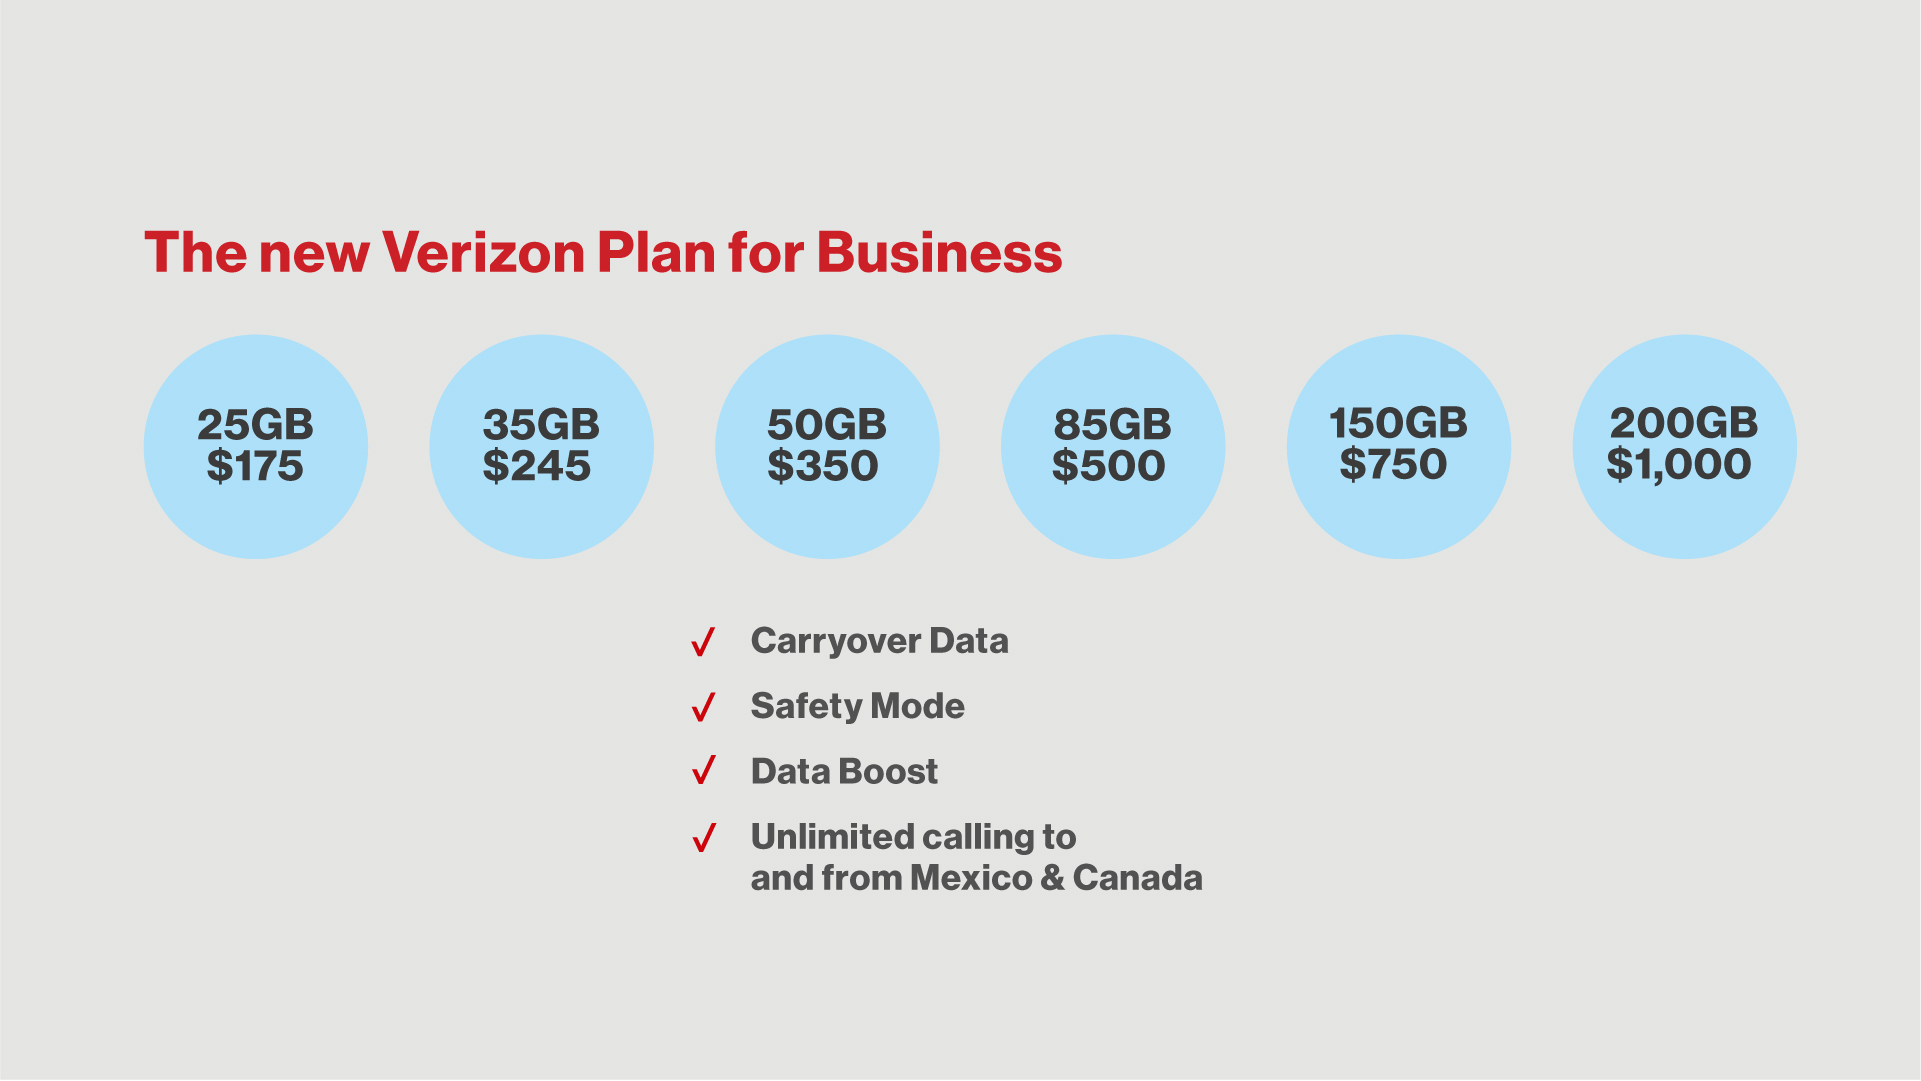 What is the Verizon rate to text Canada?